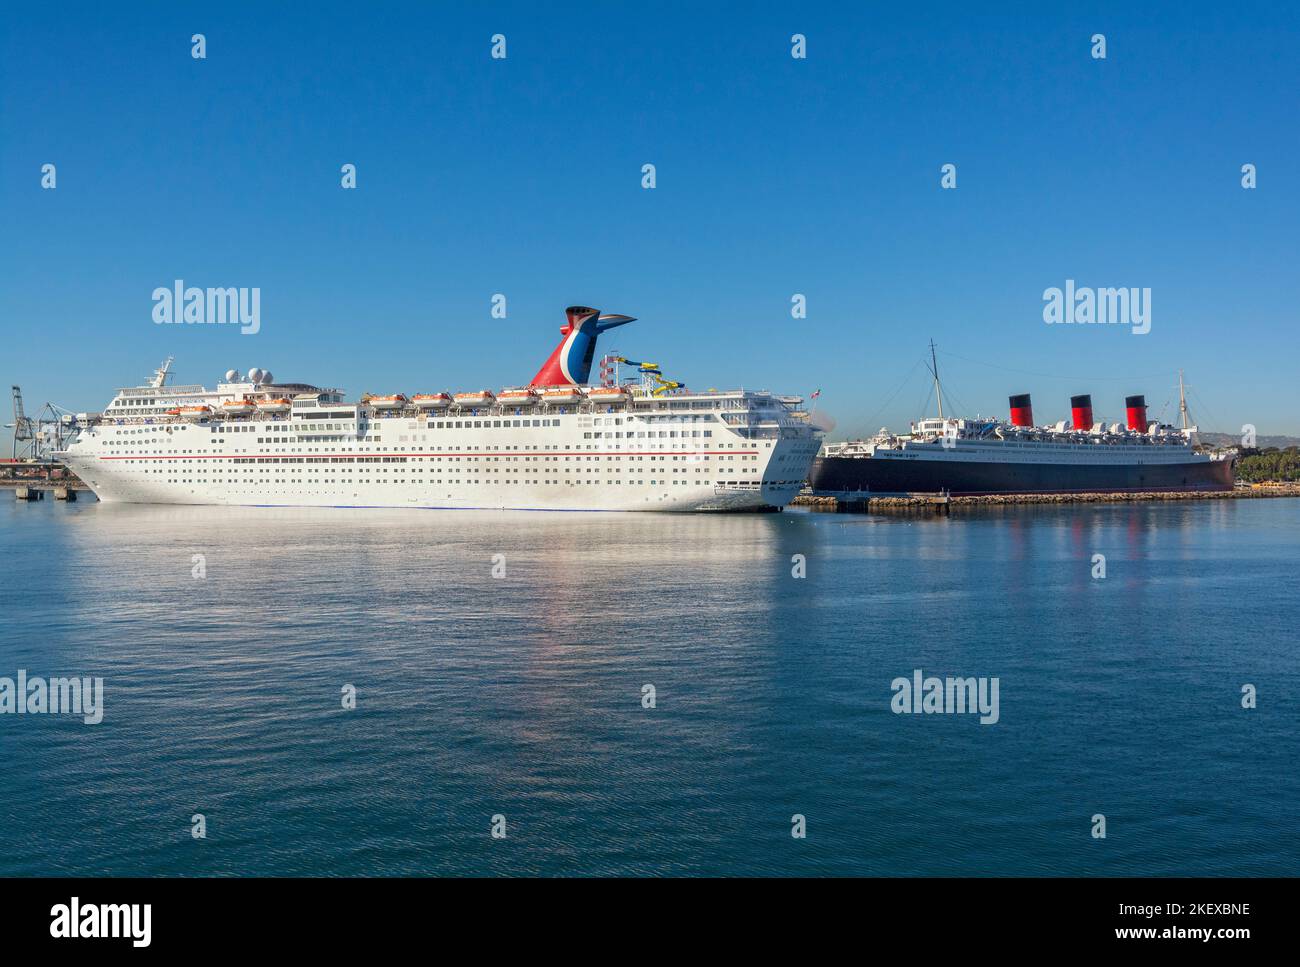 California, Long Beach, The Queen Mary, floating hotel, Carnival cruise ship Stock Photo